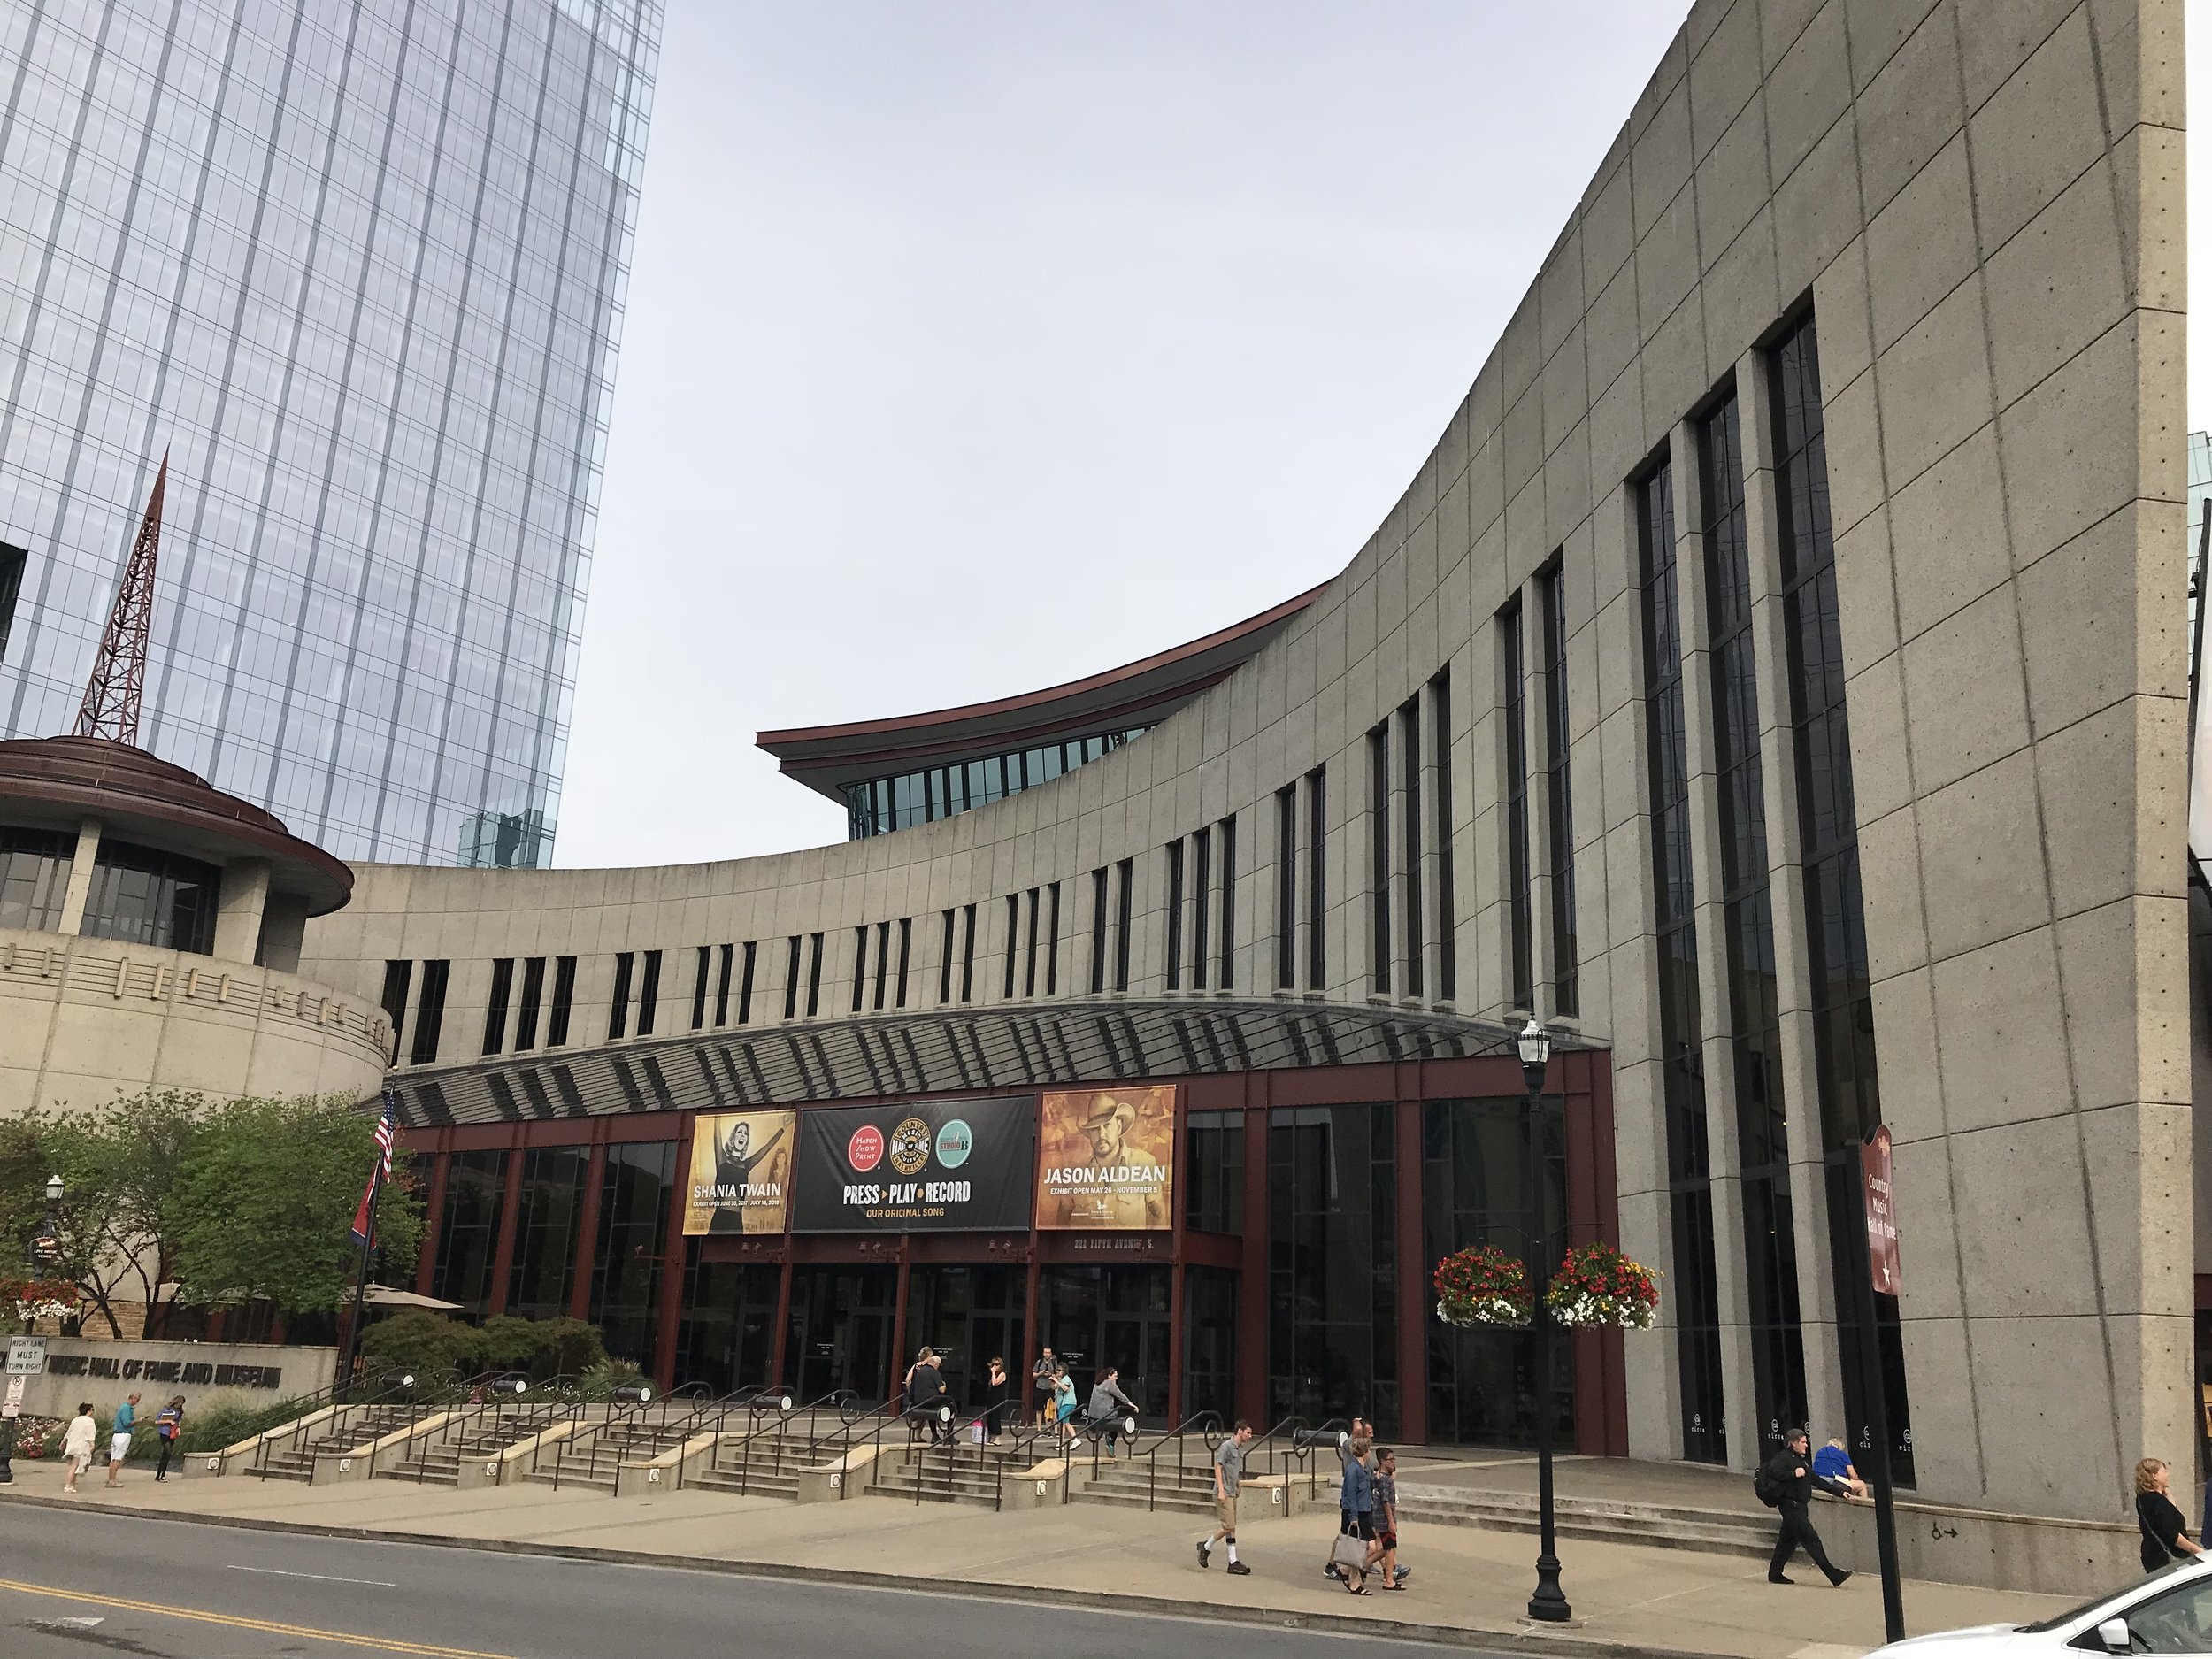 The Country Music Hall of Fame